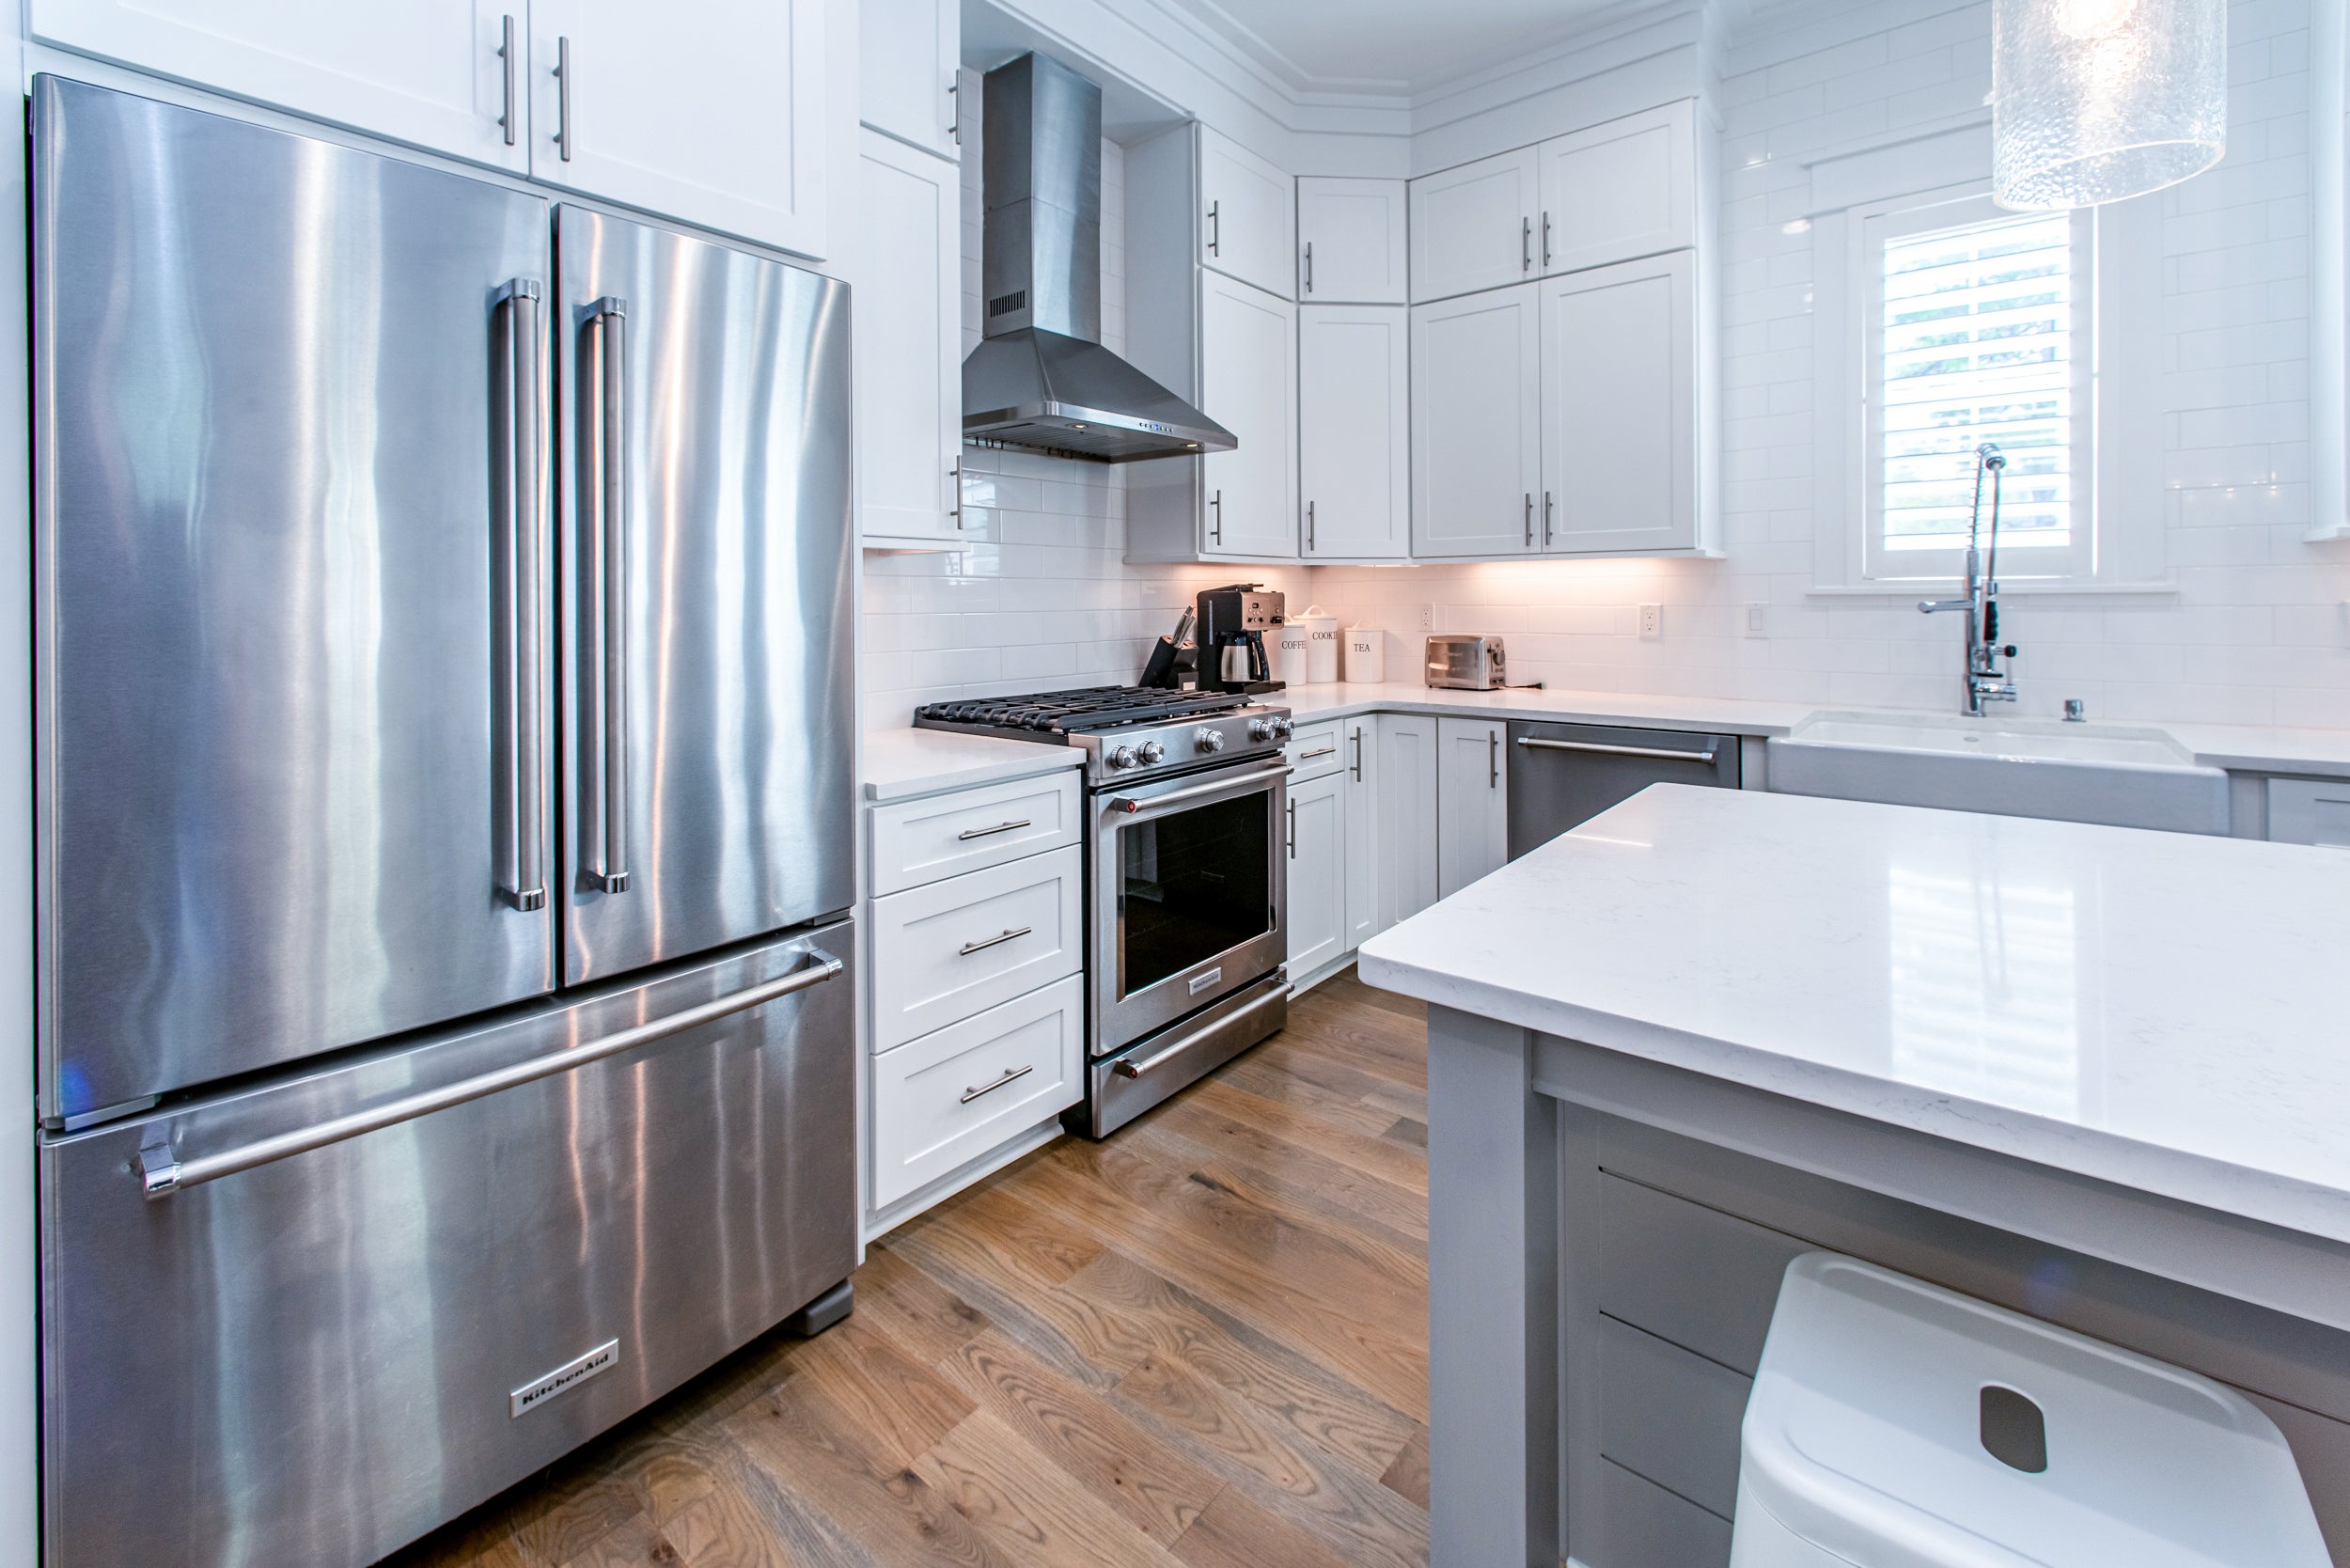 Stainless appliances and farmhouse sink